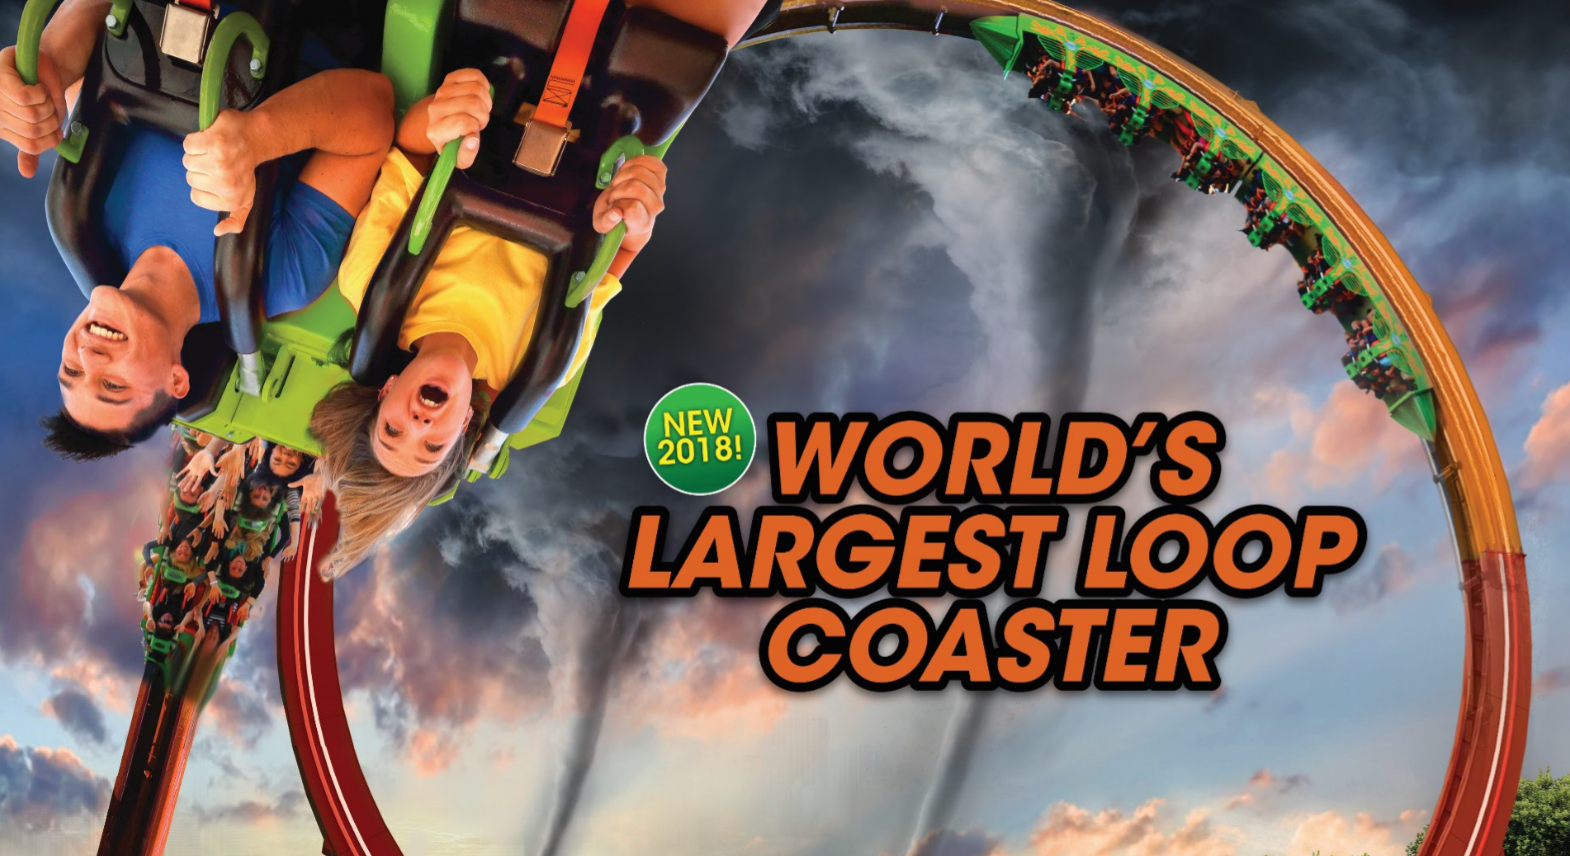 New Coaster Planned for Six Flags Great America in 2018